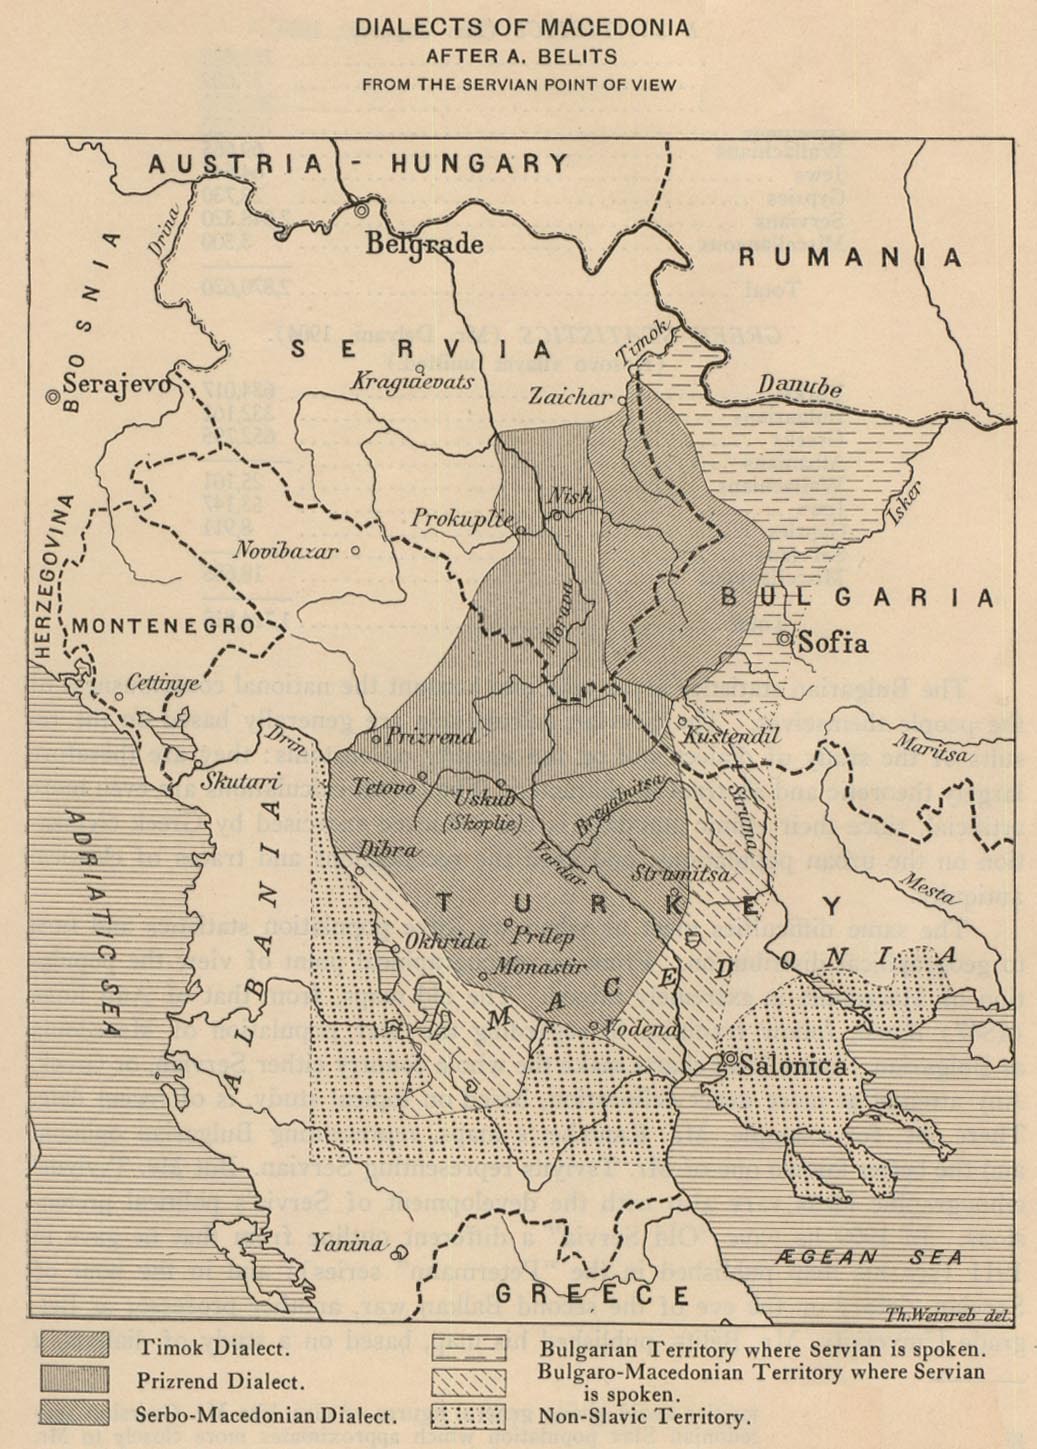 [Dialects+of+Macedonia+From+the+Servian+Point+of+View.jpg]